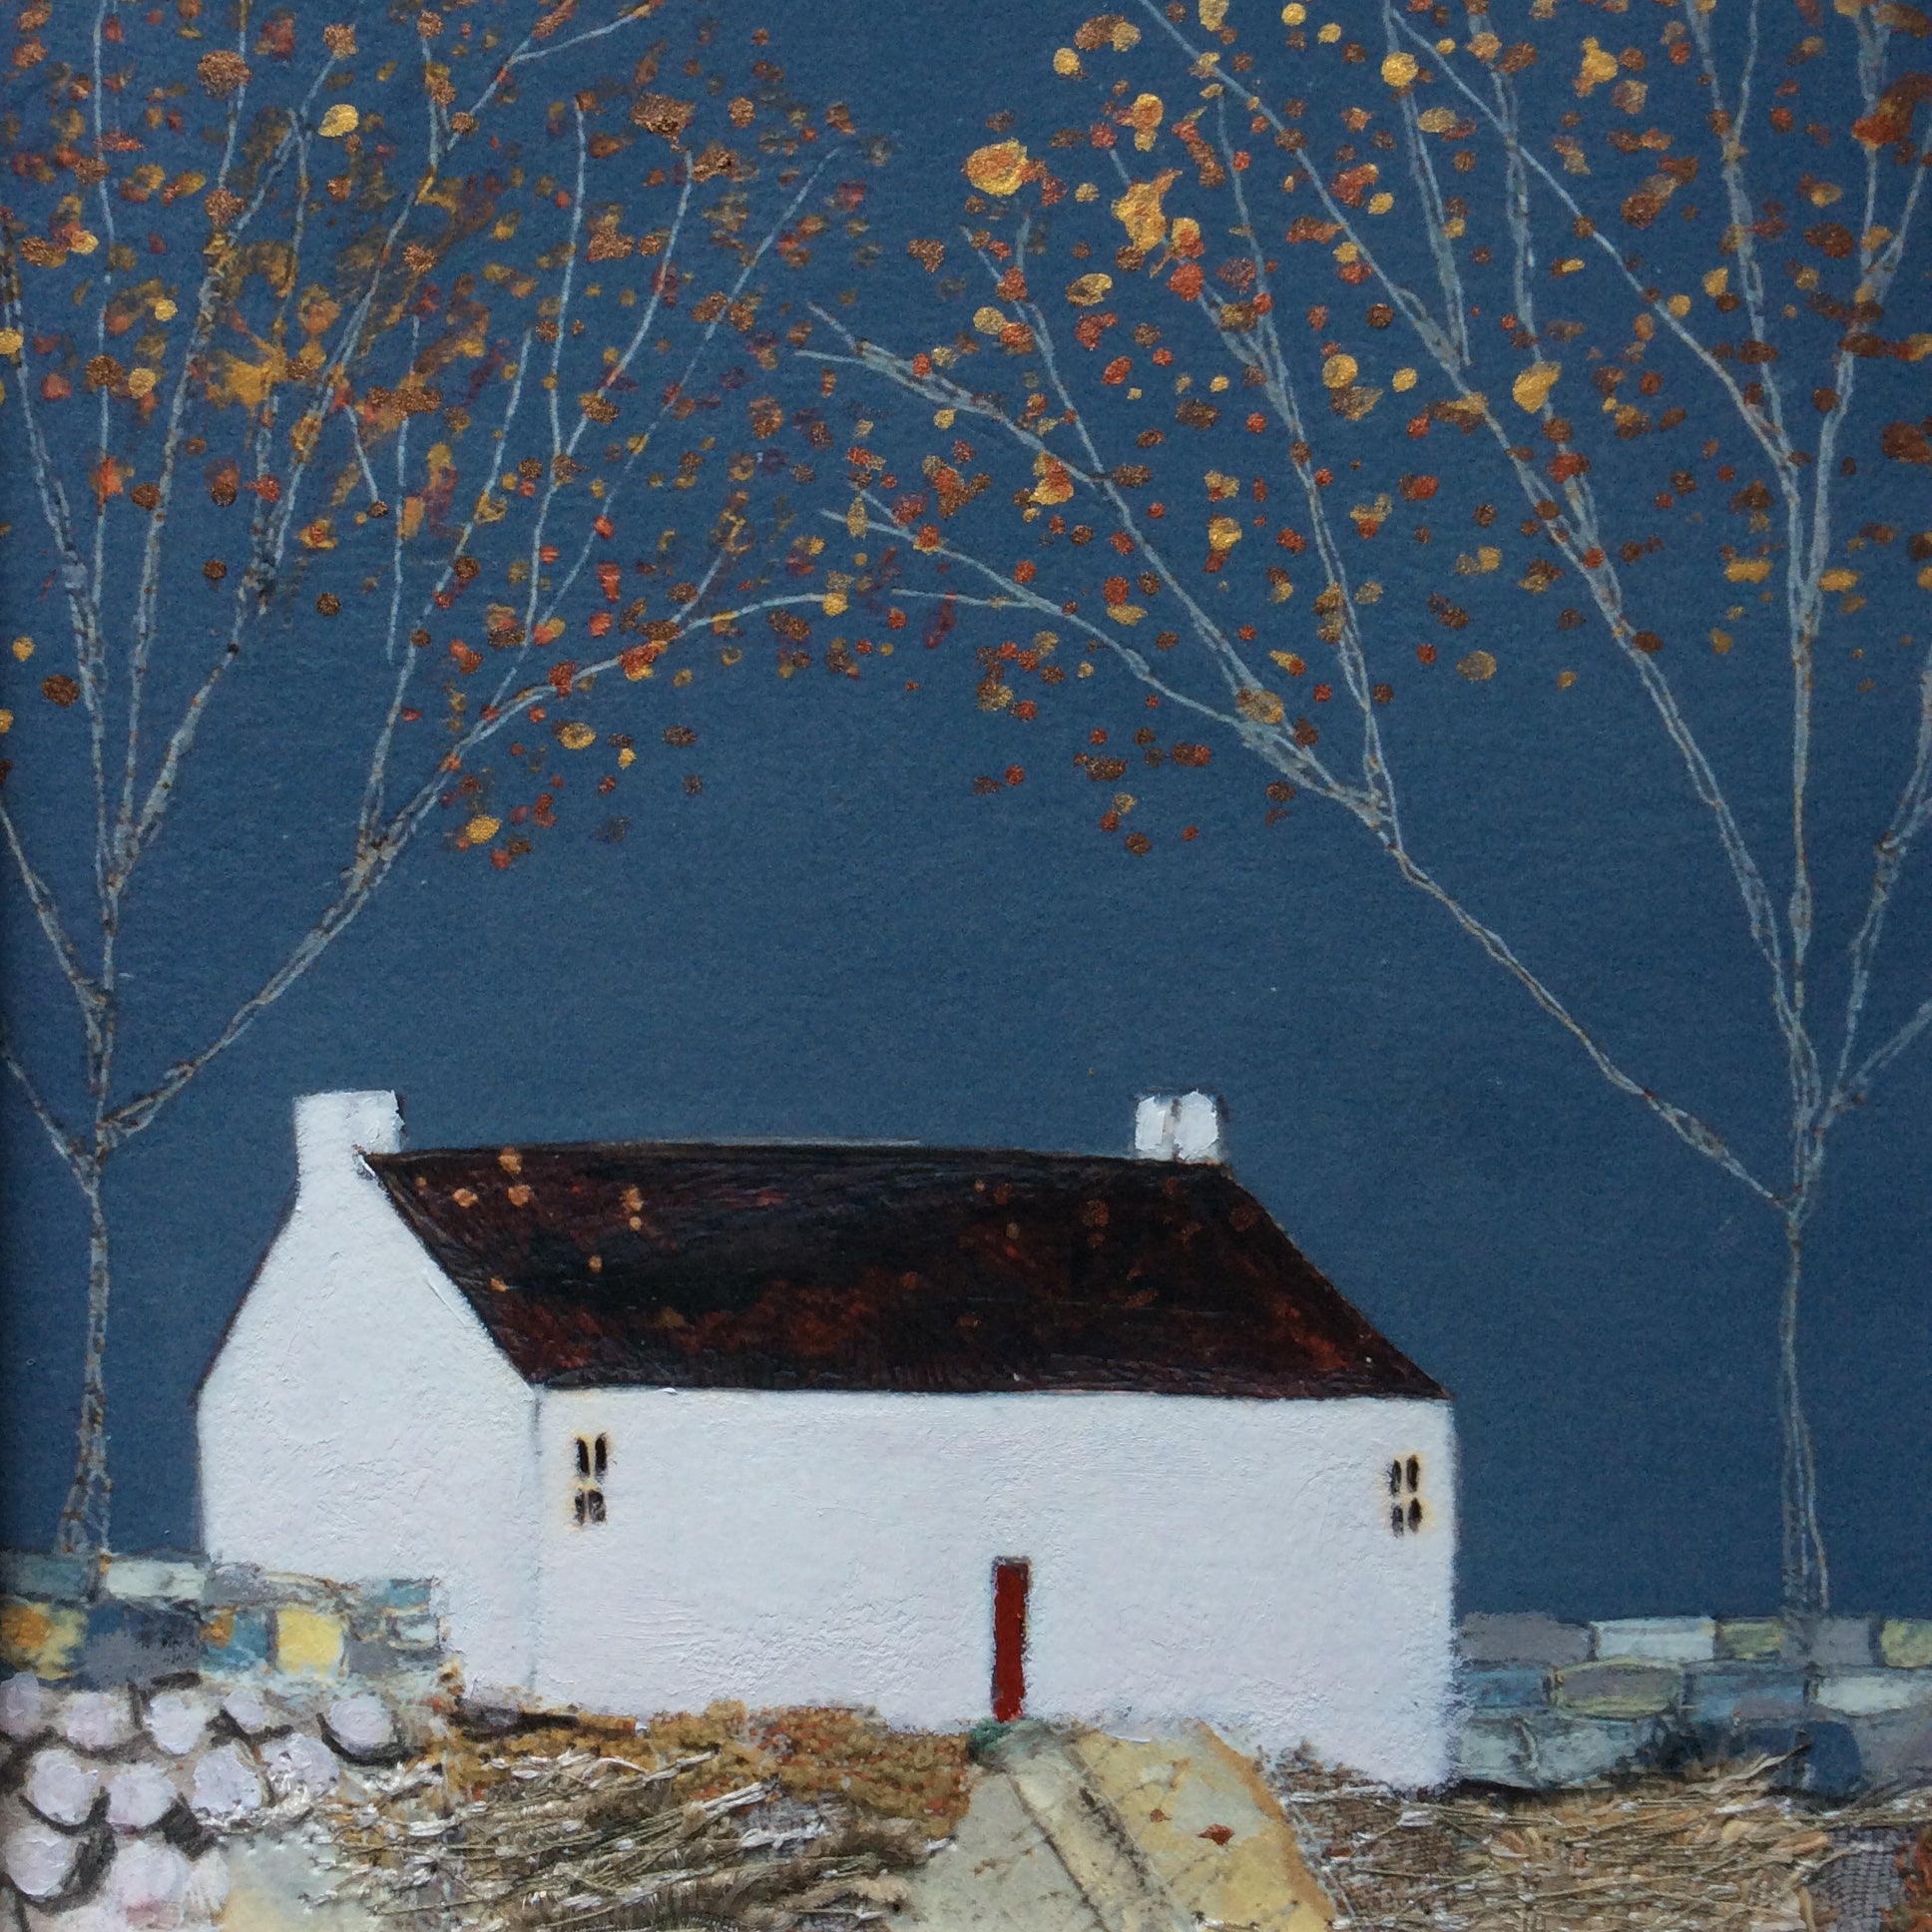 Mixed Media Art print work by Louise O'Hara "Copper tones of Autumn"